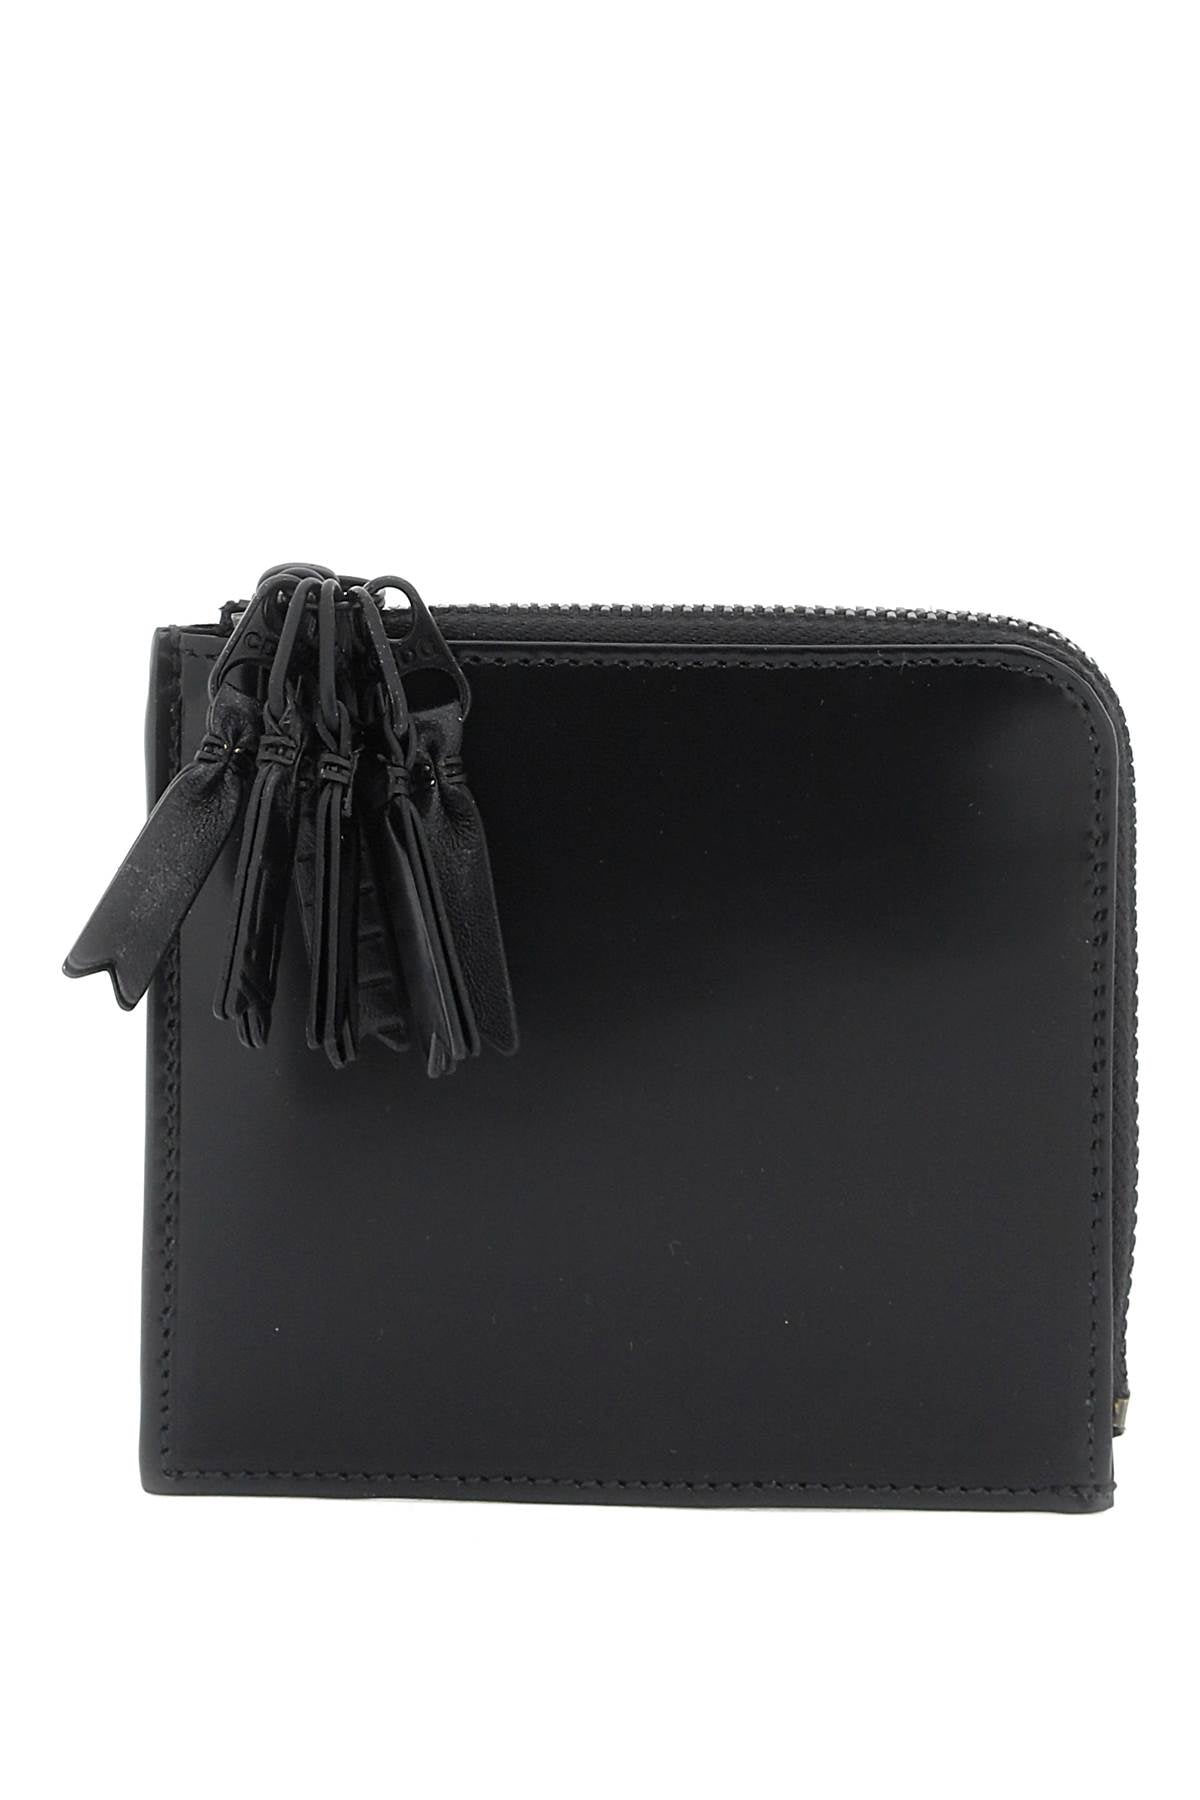 Comme des garcons wallet leather multi-zip wallet with-0